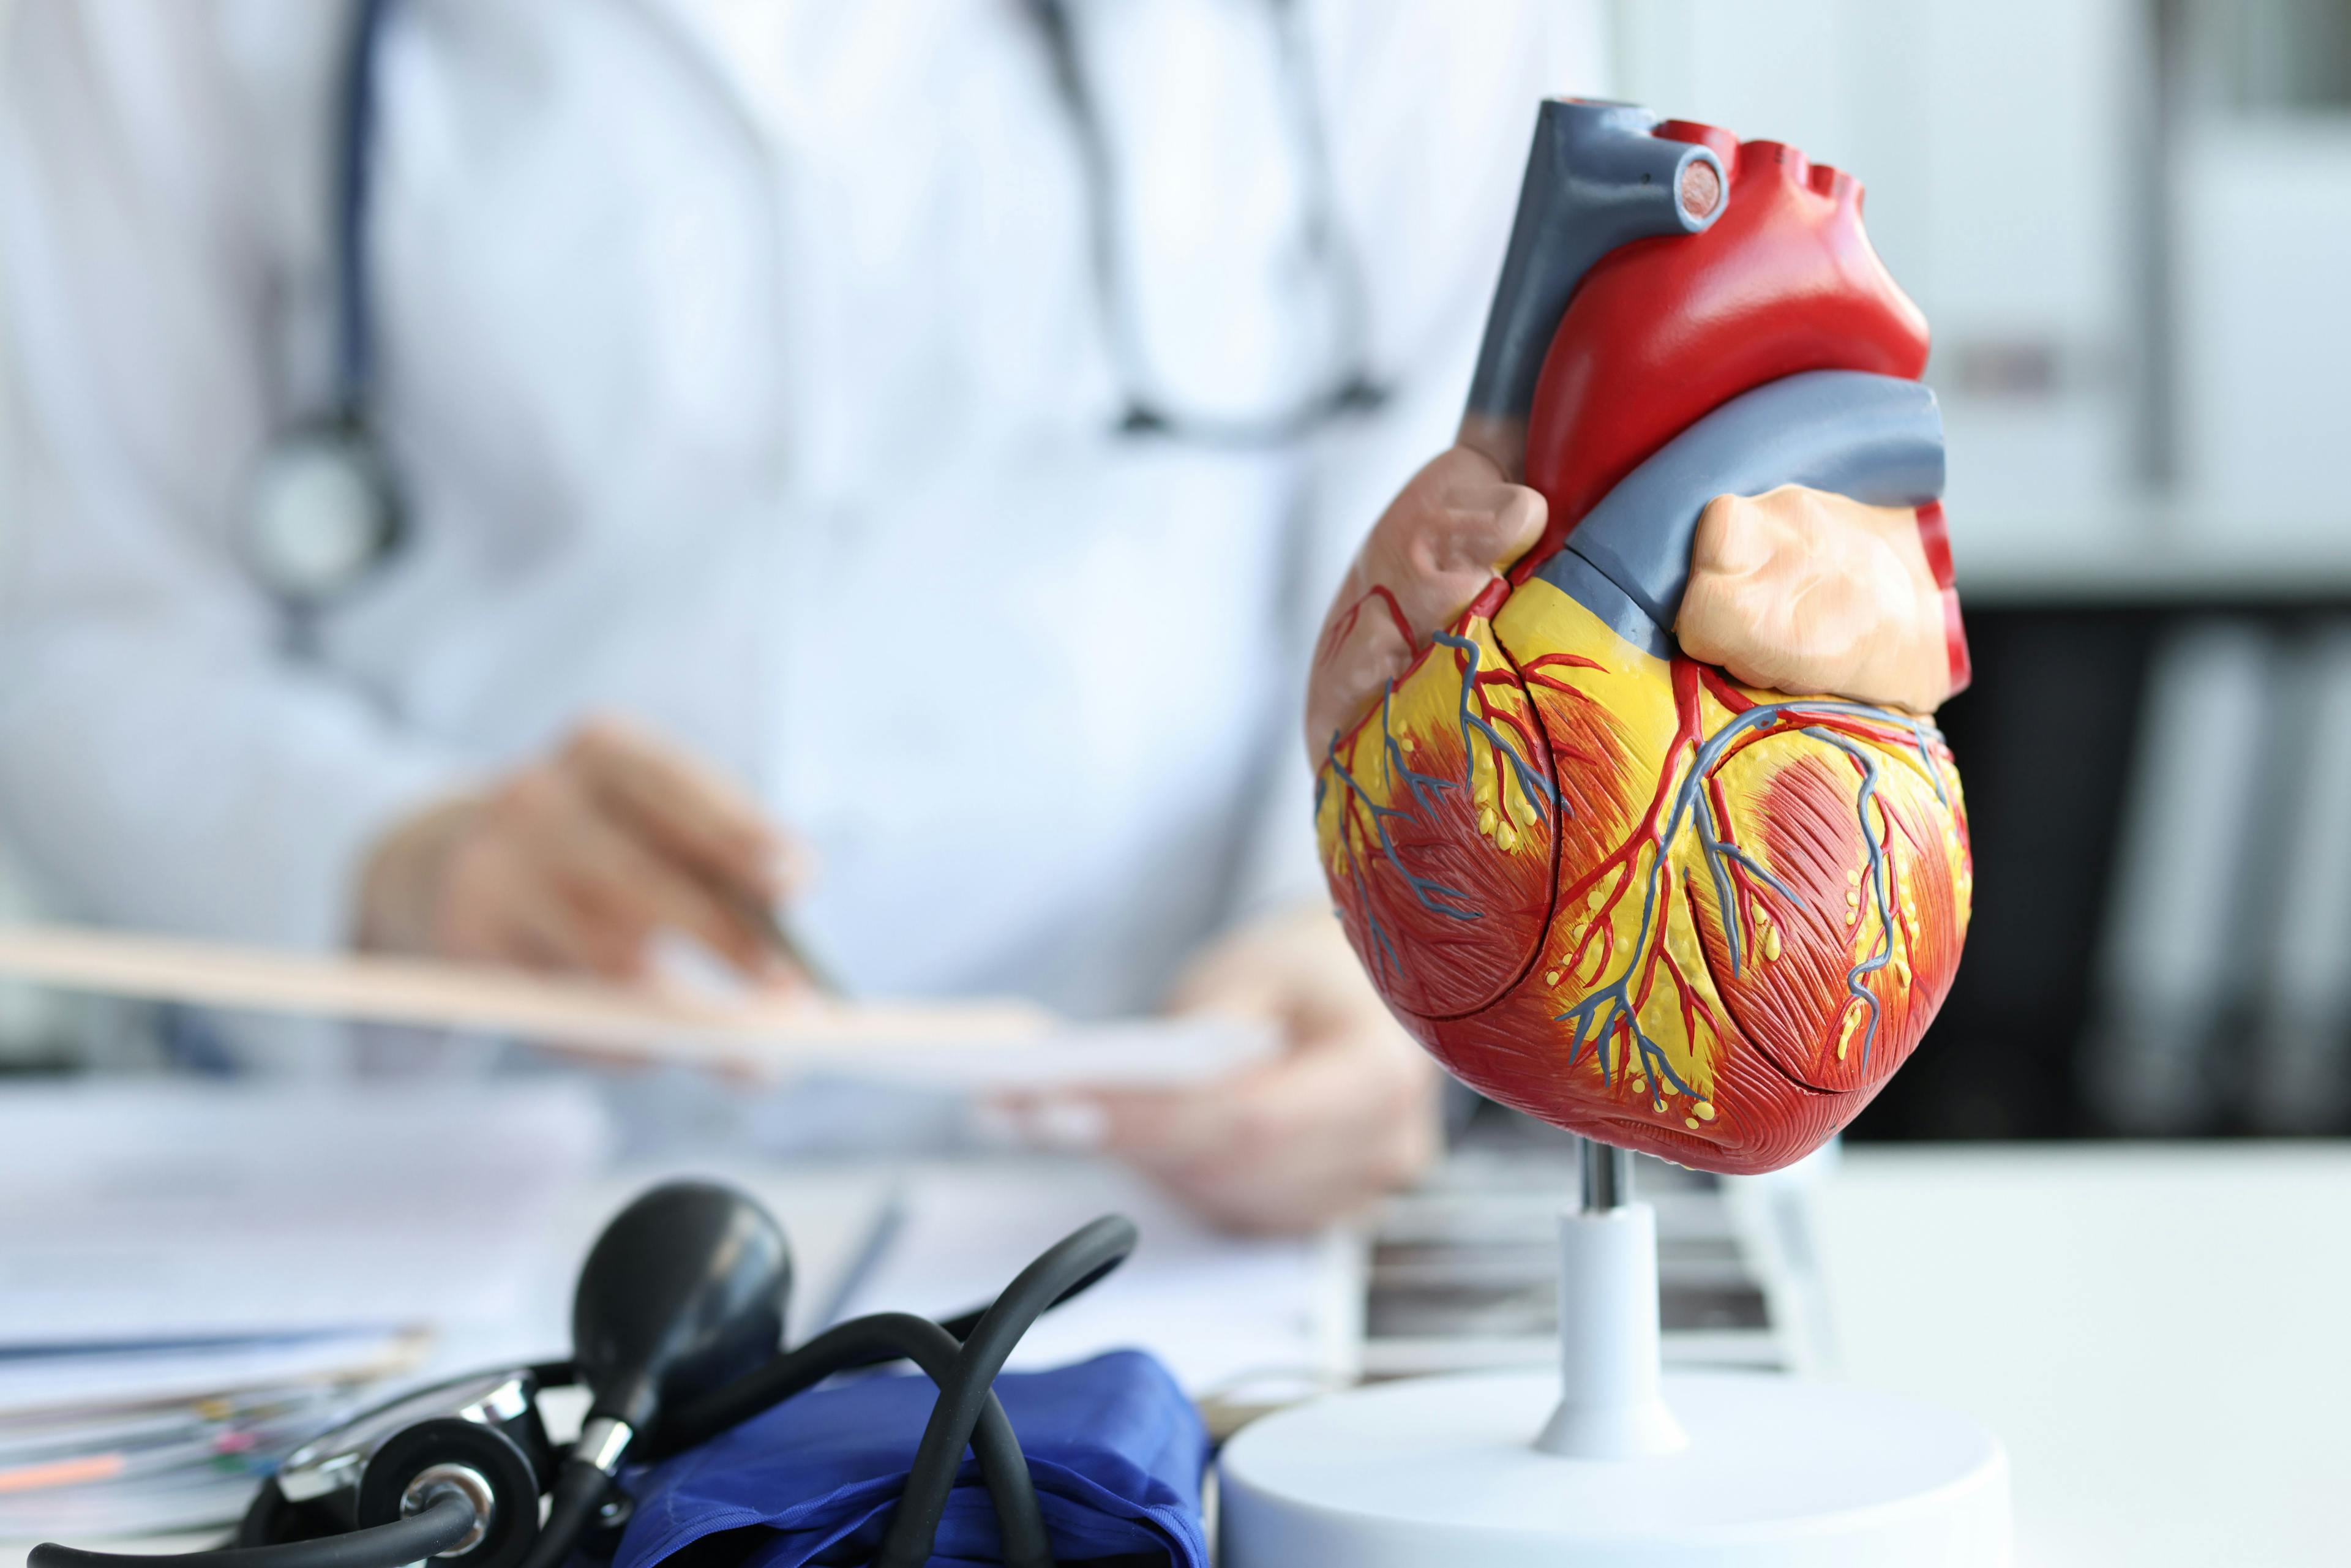 Artificial plastic model of human heart standing against background of cardiologist closeup | Image Credit: H_Ko - stock.adobe.com